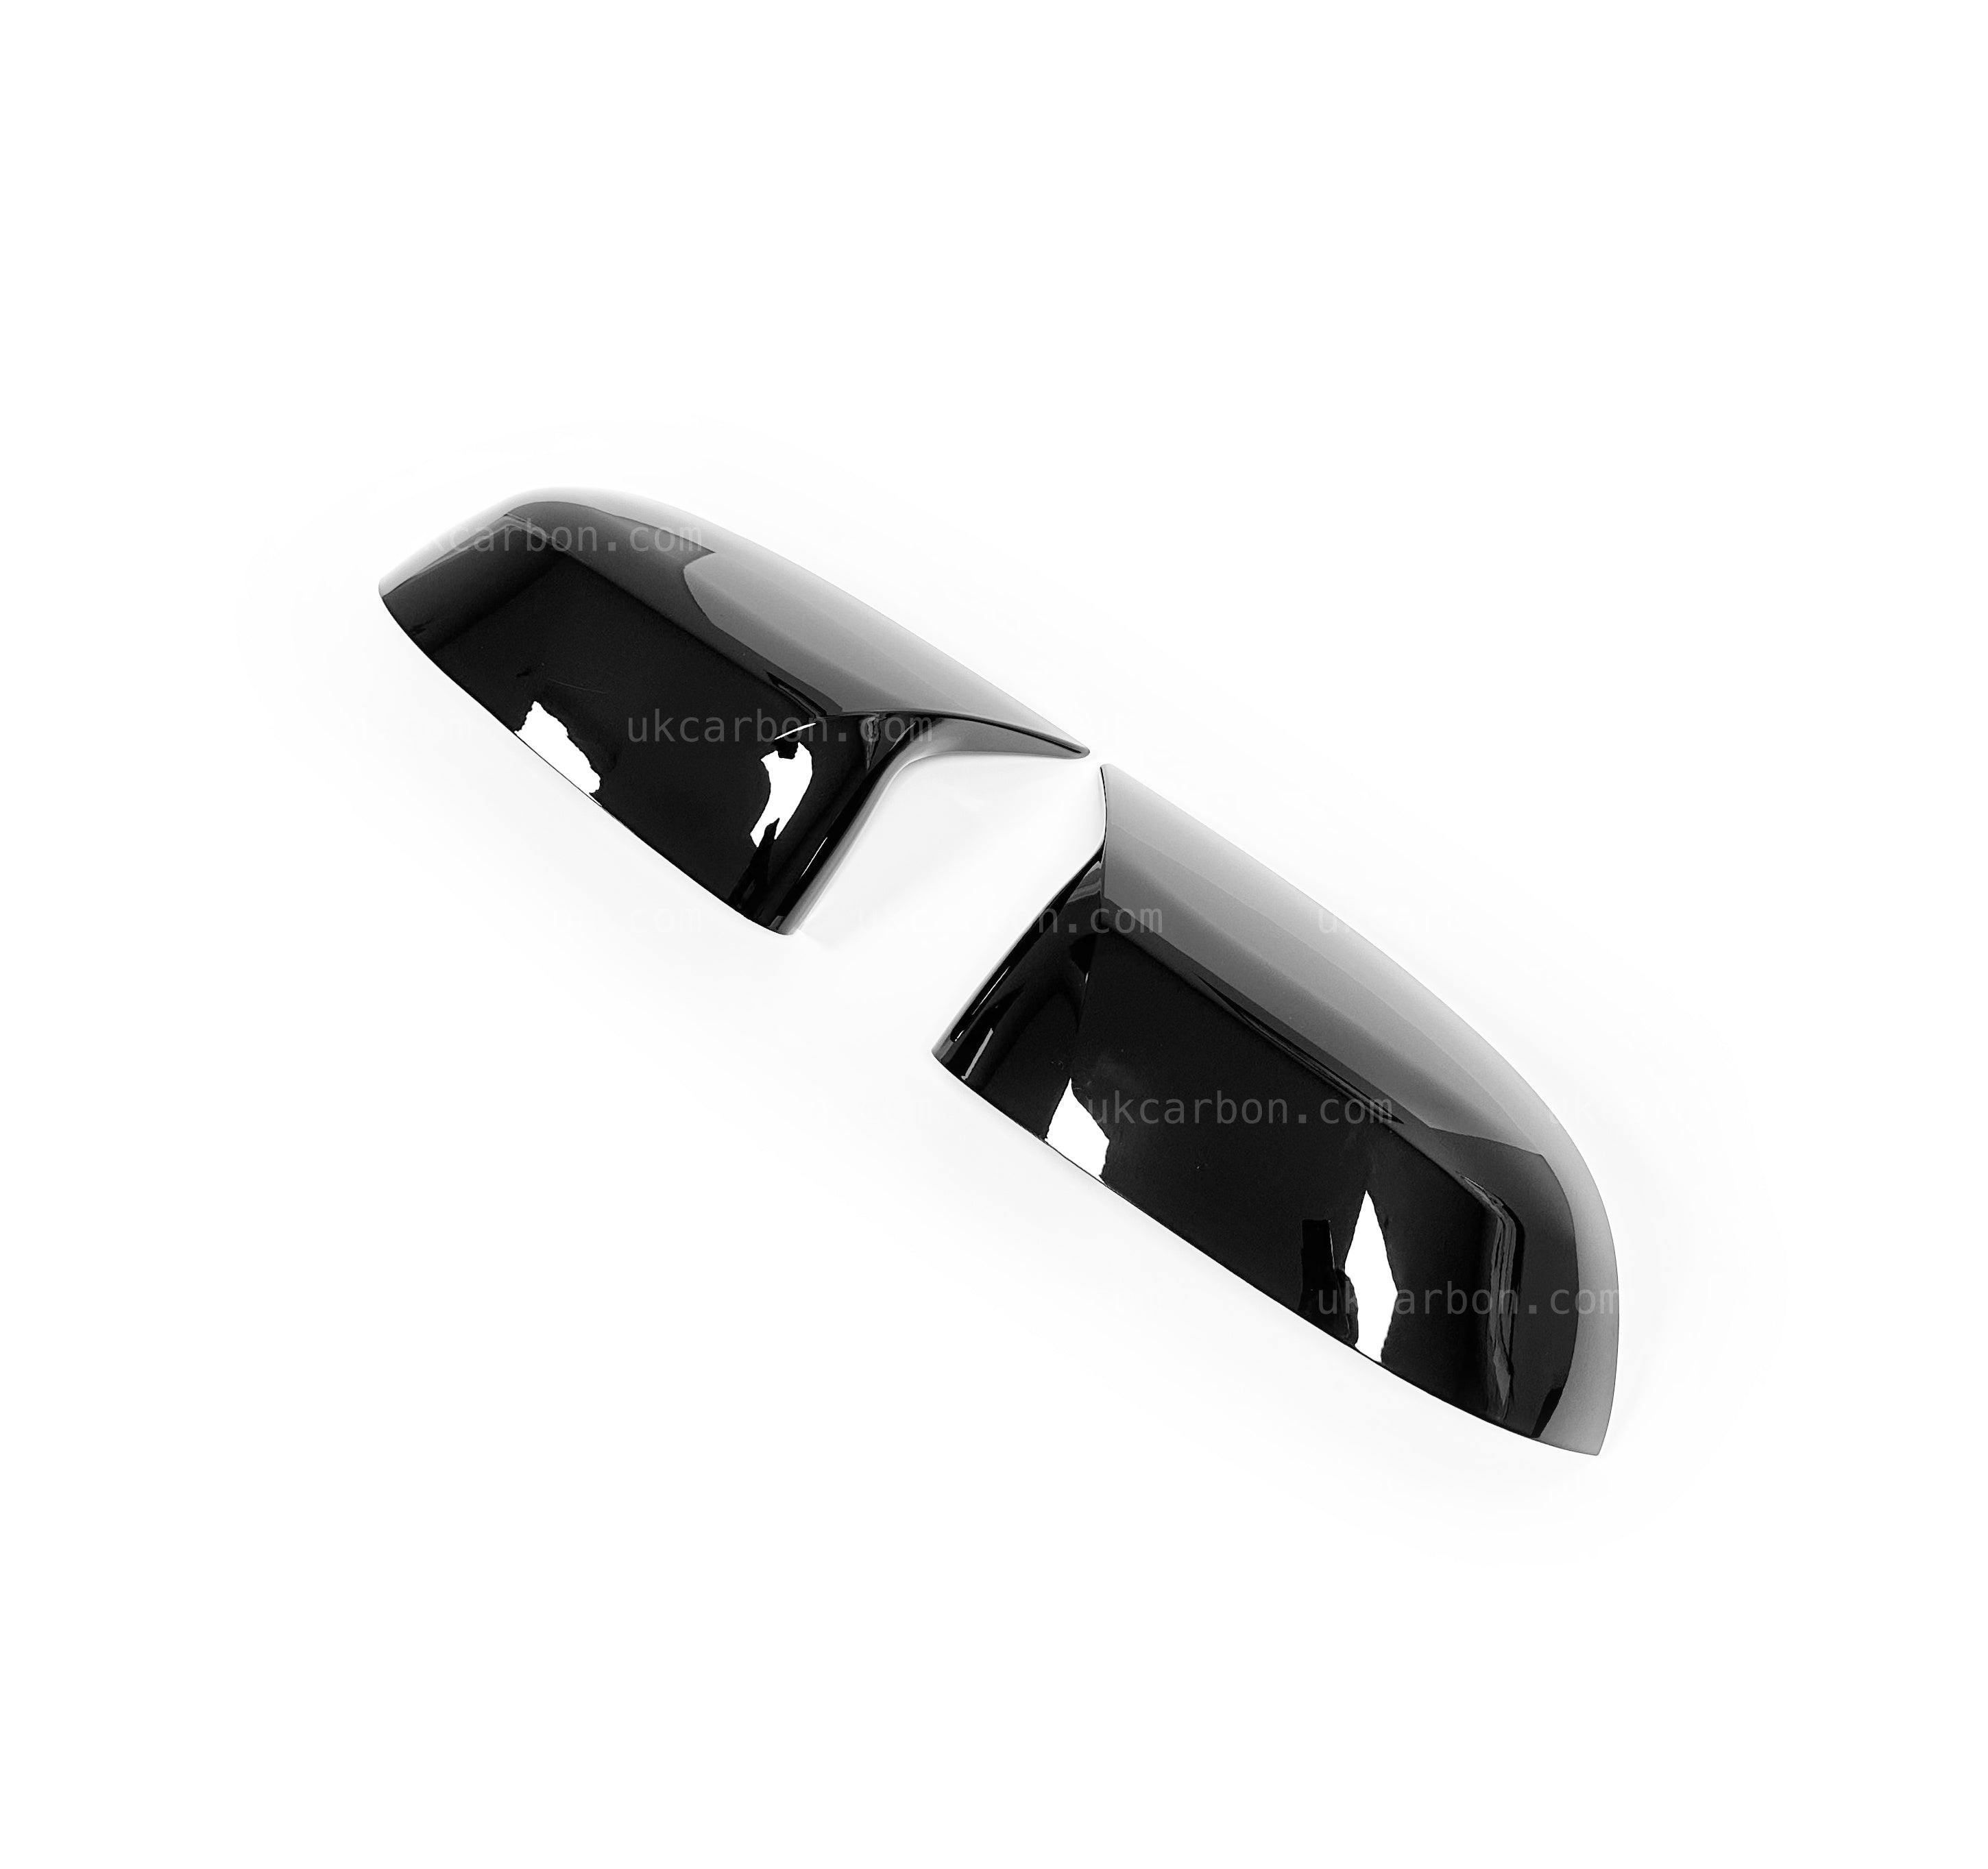 BMW X5 Gloss Black M Style Wing Mirror Cover M Performance G05 by UKCarbon